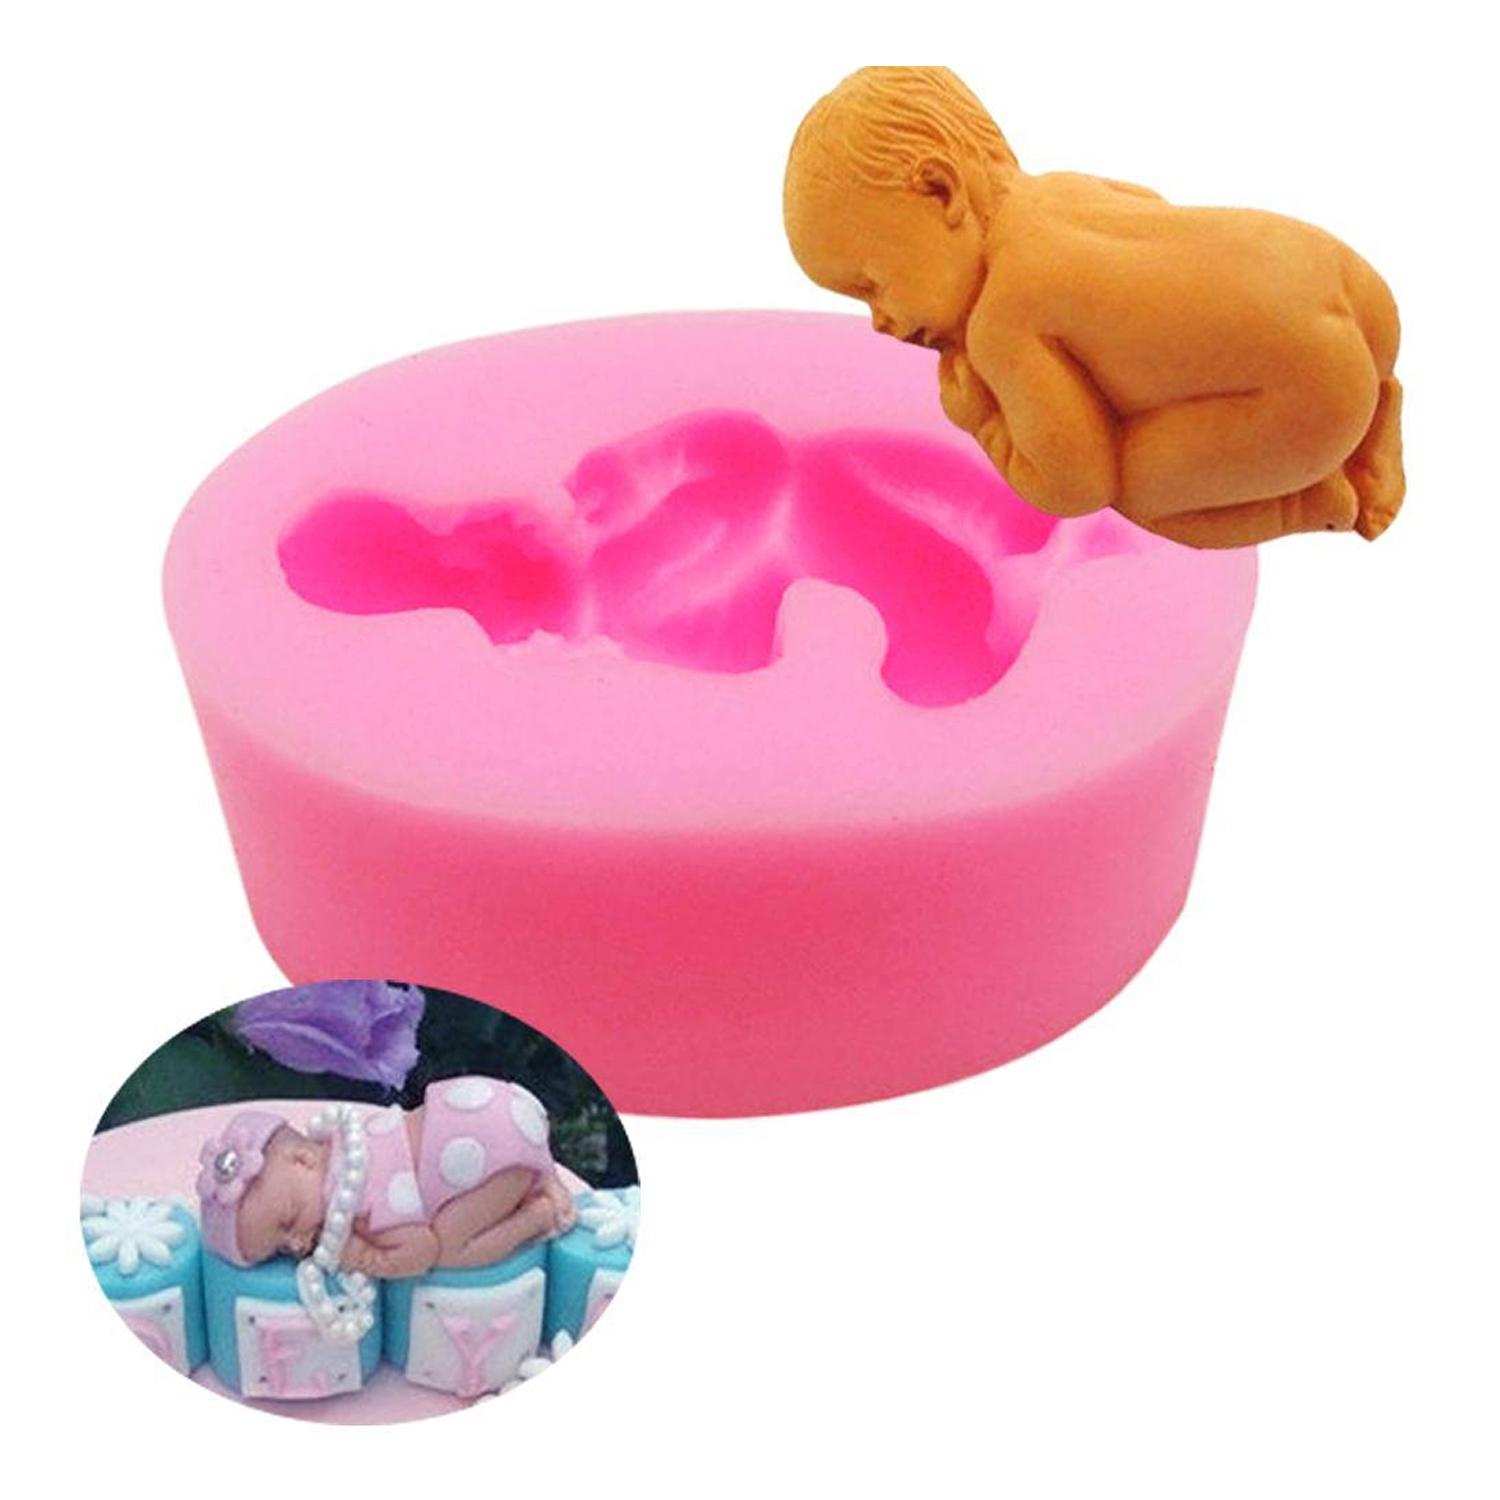 SFGM0090 SLEEPING BABY SILICONE MOULD SMALL